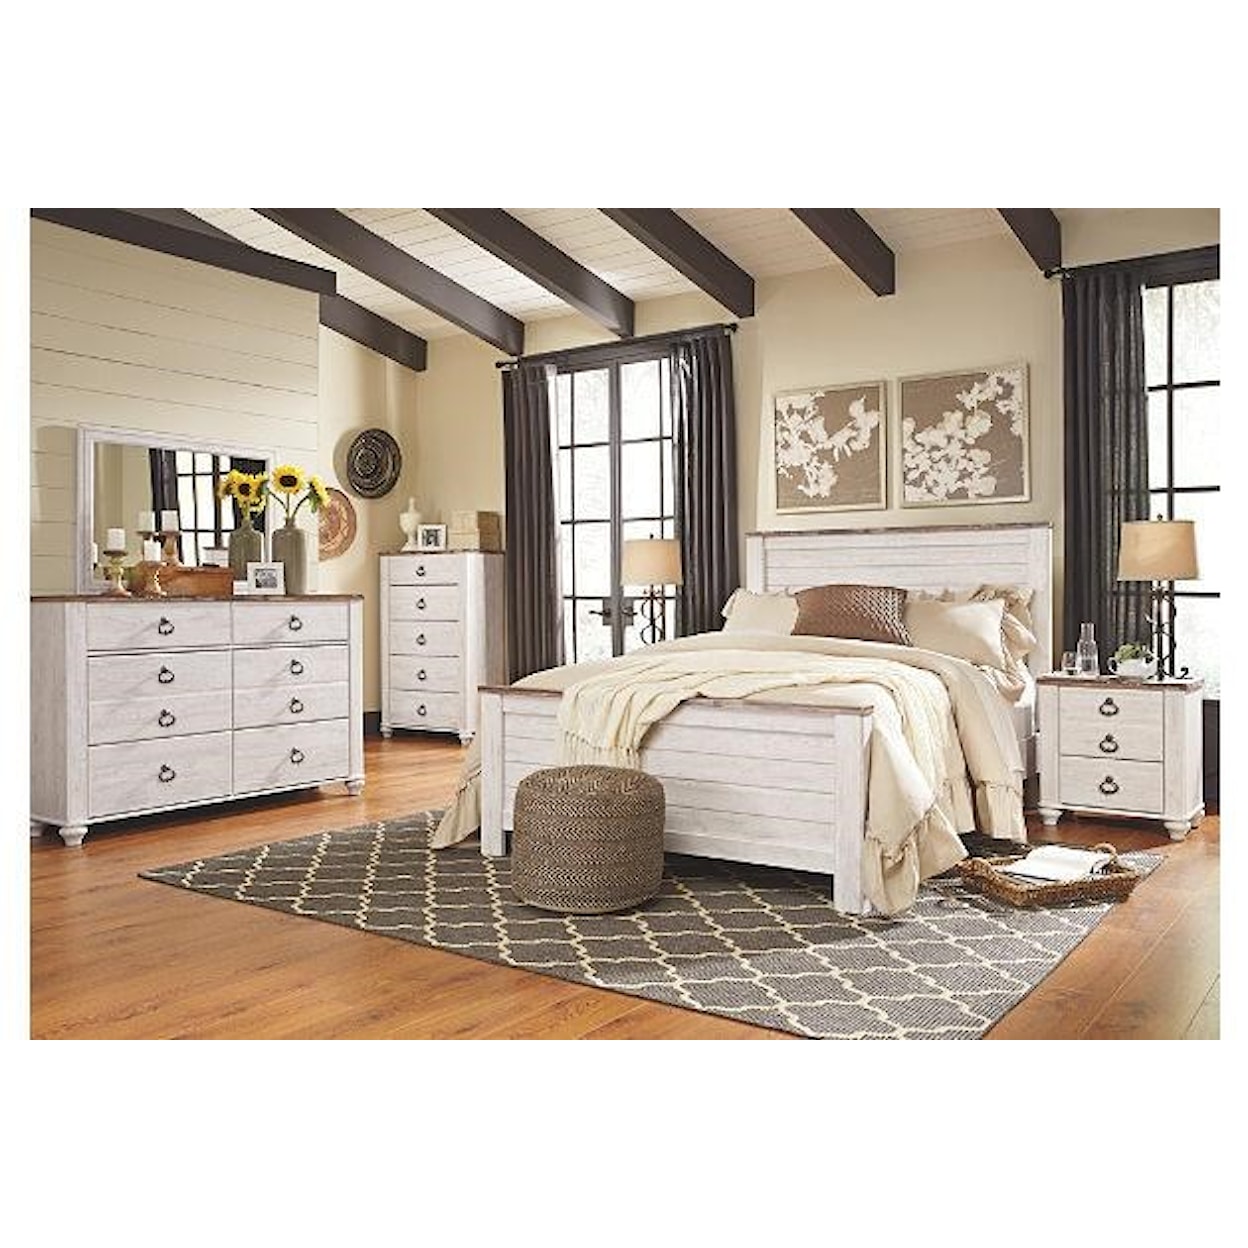 Signature Design by Ashley Willowton 6PC Queen Bedroom Group